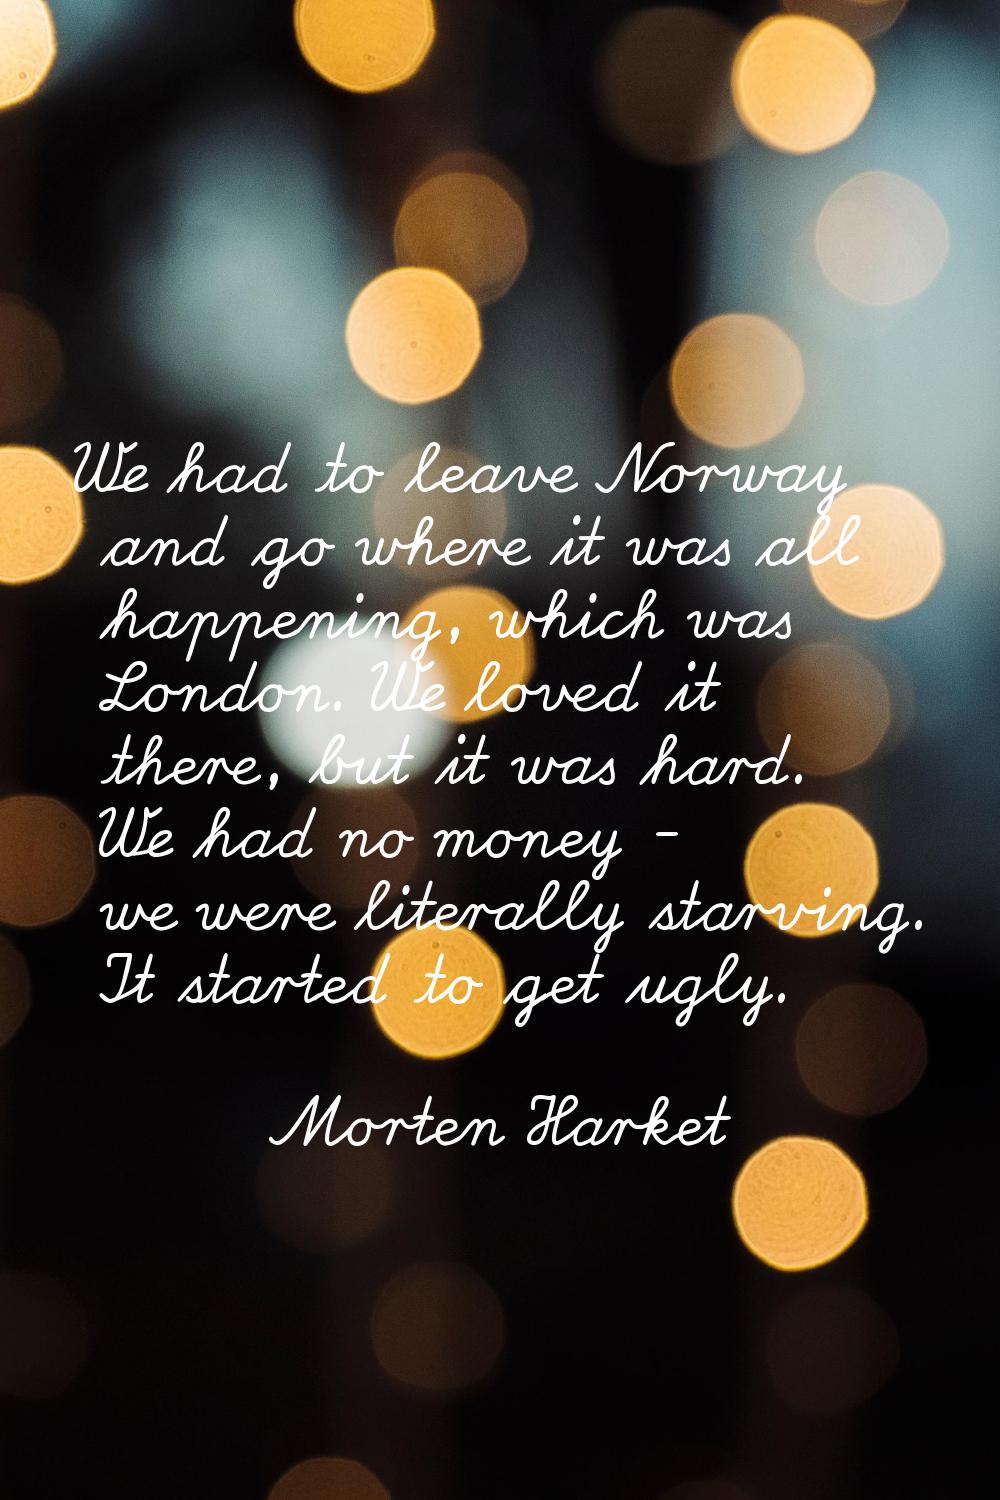 We had to leave Norway and go where it was all happening, which was London. We loved it there, but 